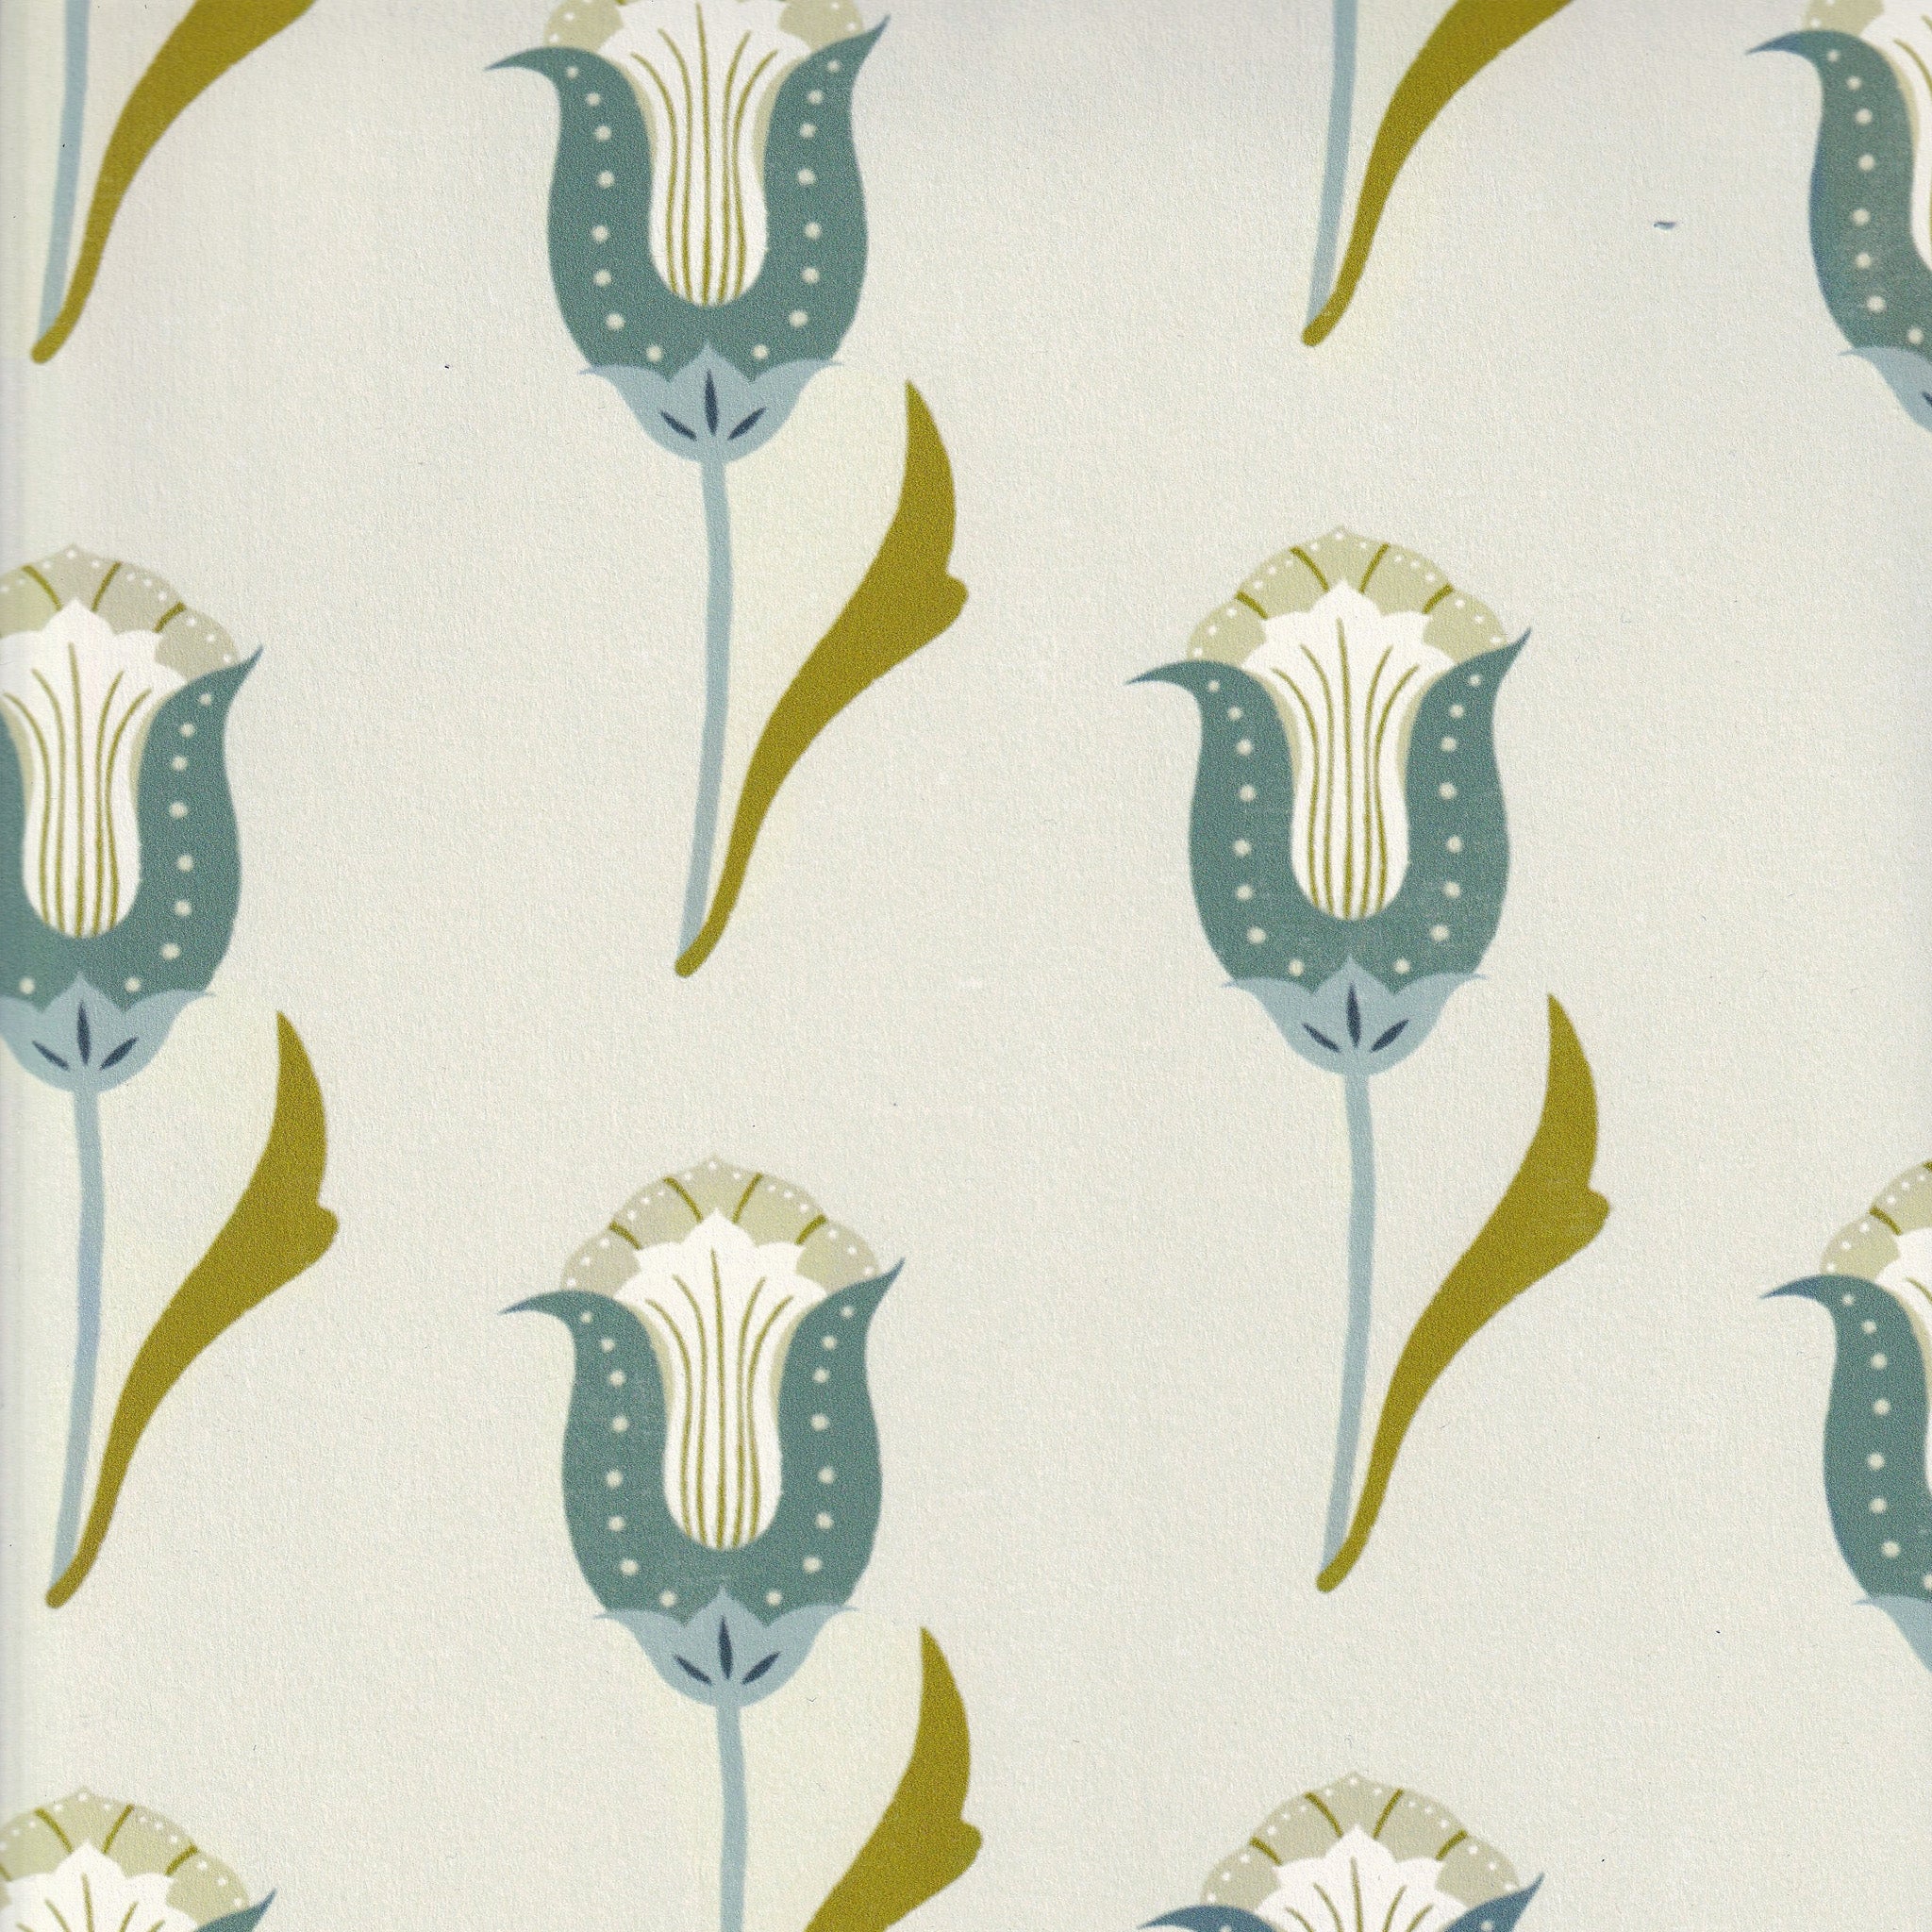 Abstract floral blue and green wallpaper swatch